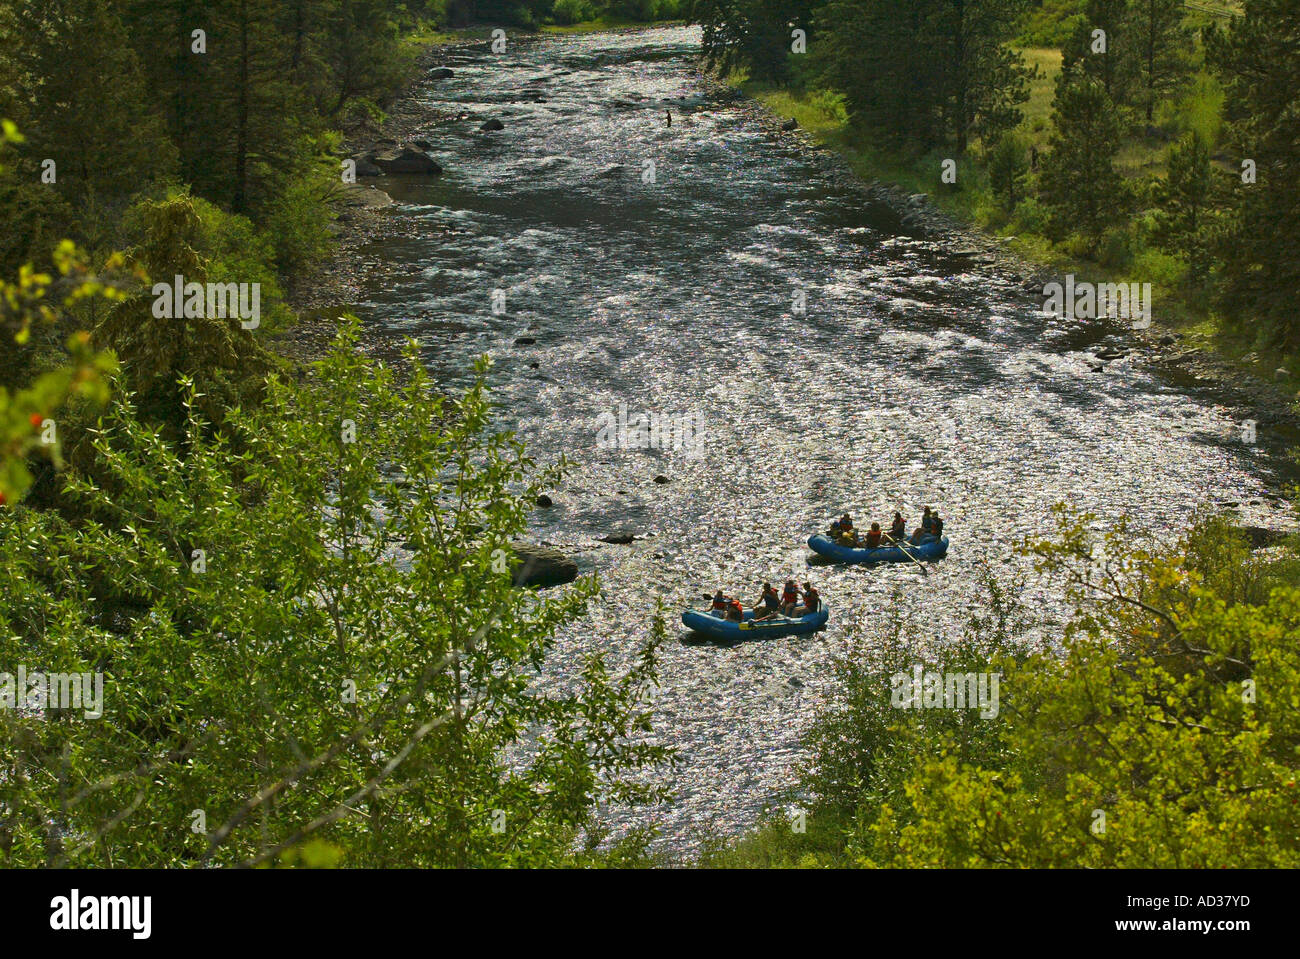 Tourists white water rafting on a river in Colorado, USA. Stock Photo